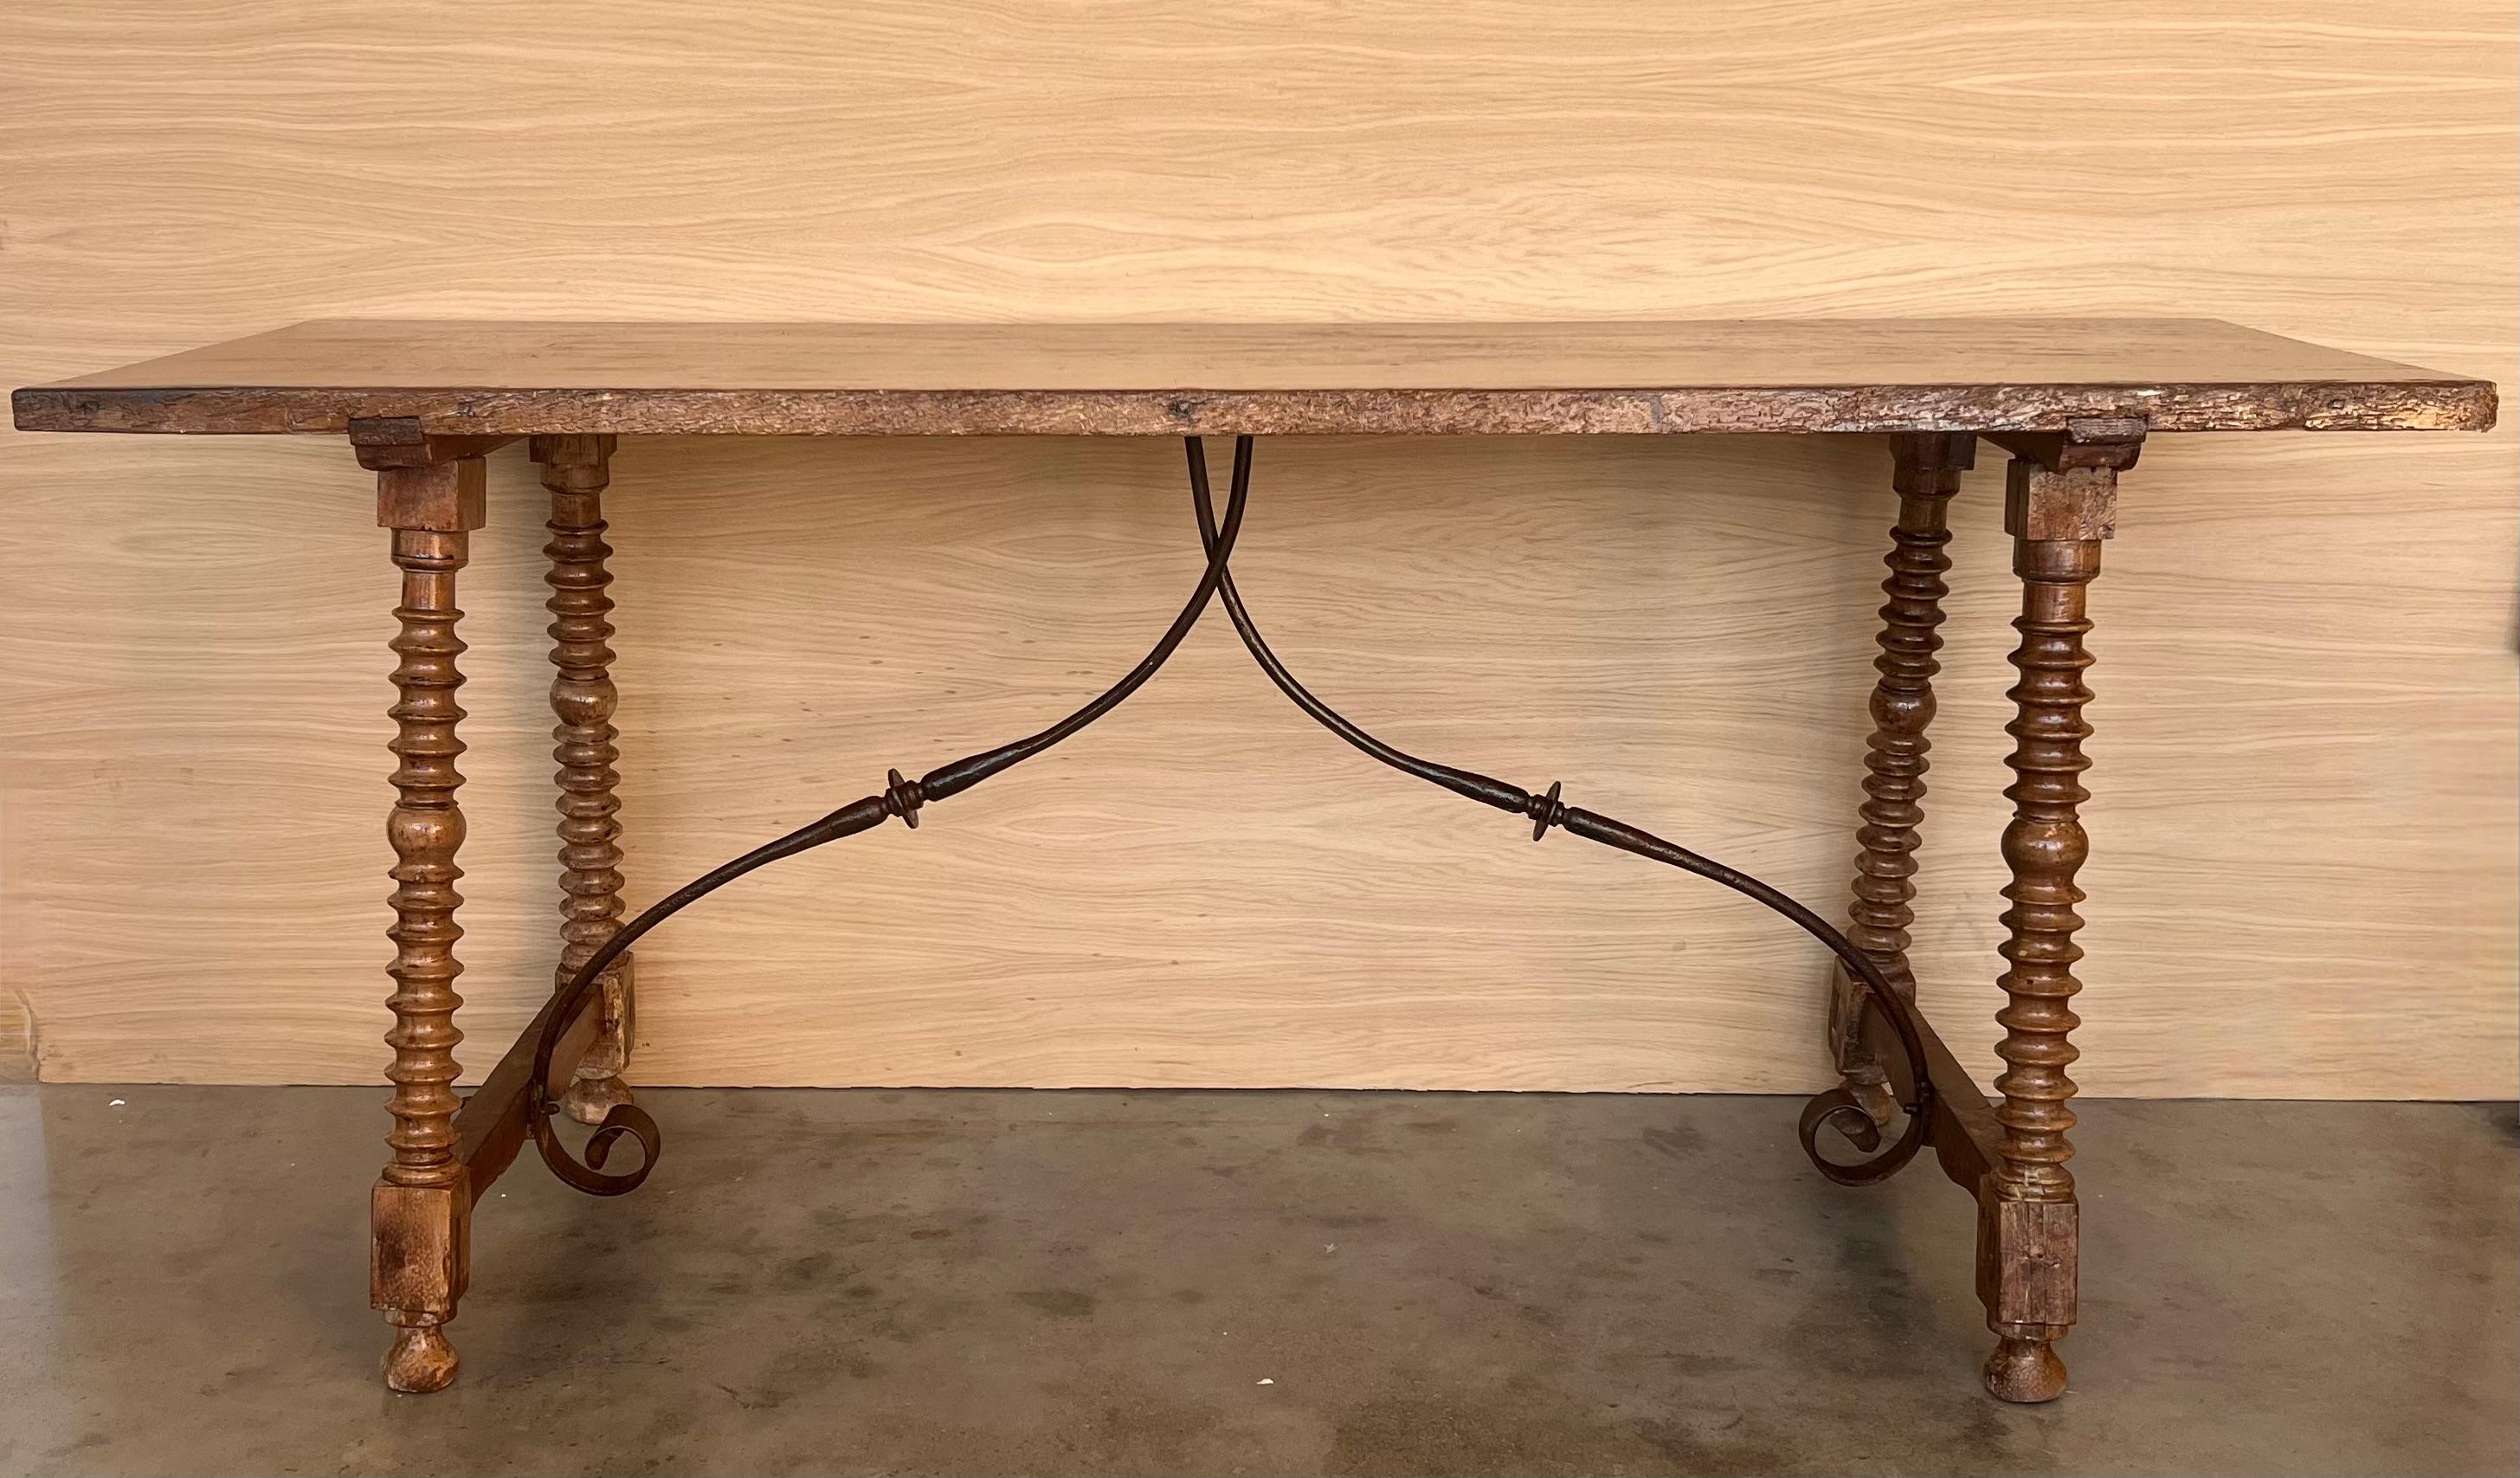 A Spanish Fratino dining table with hand made wrought-iron stretcher from the late 19th century. This Spanish wooden table features a sturdy rectangular top sitting above an exquisite base made of splayed carved legs connected to one another with a